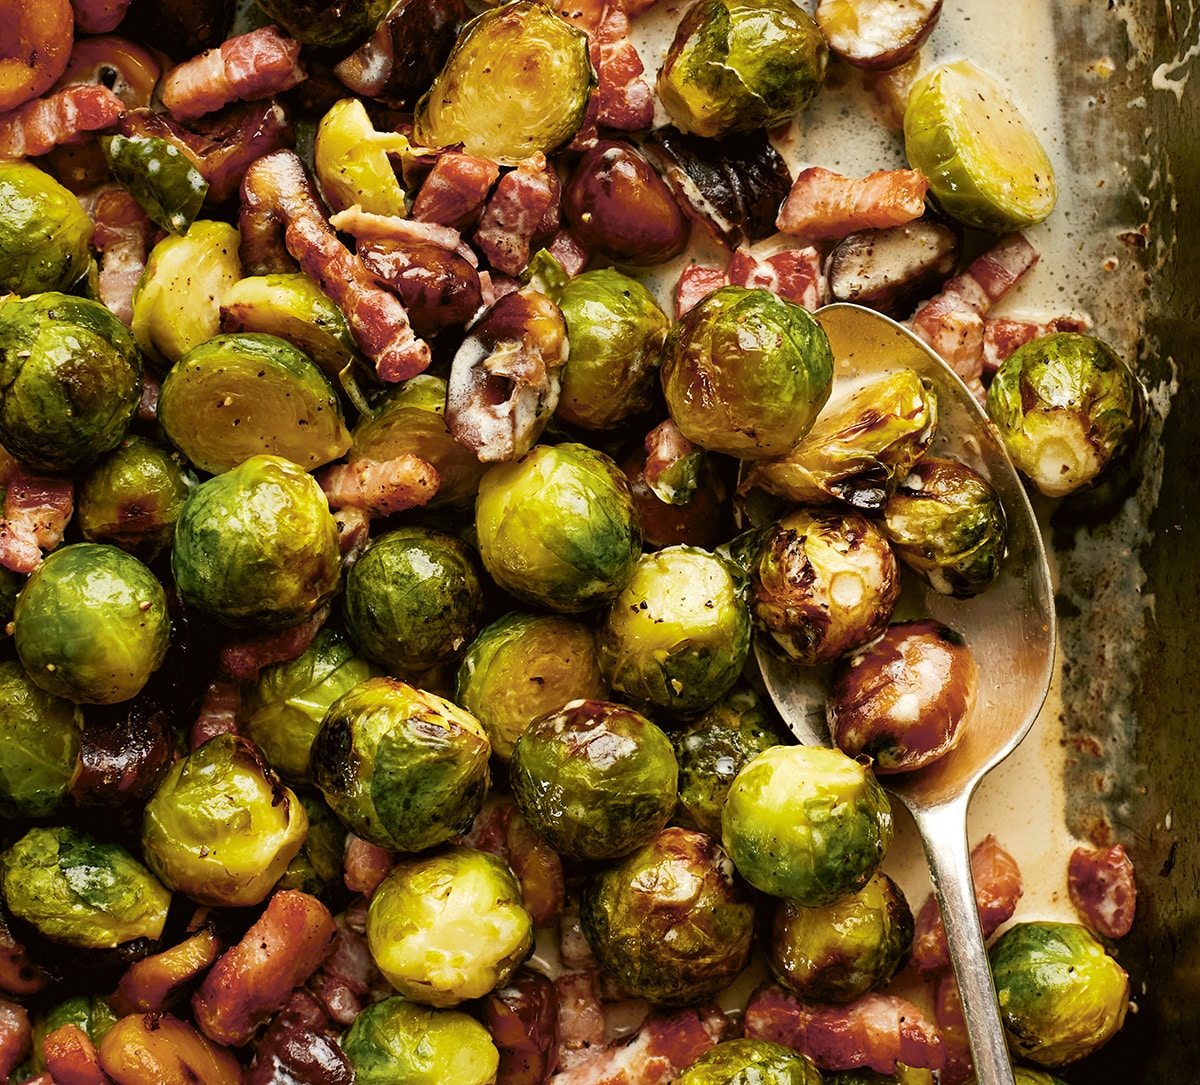 Roasted brussels sprouts with bacon, chestnuts & cream, made with Borough Market ingredients